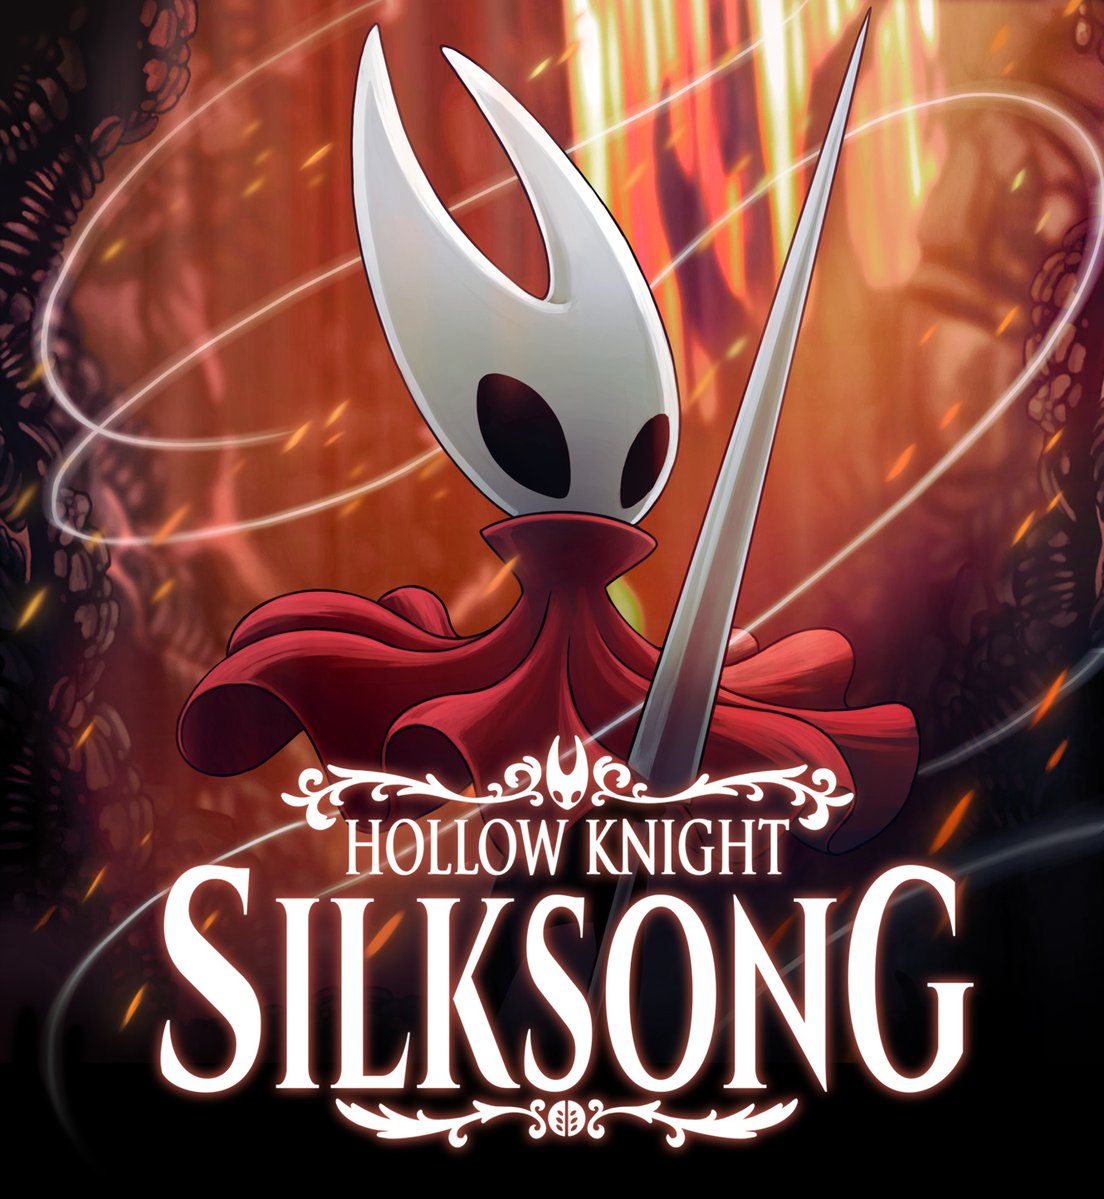 Hollow Knight: Silksong announced for Switch, sequel to Hollow Knight